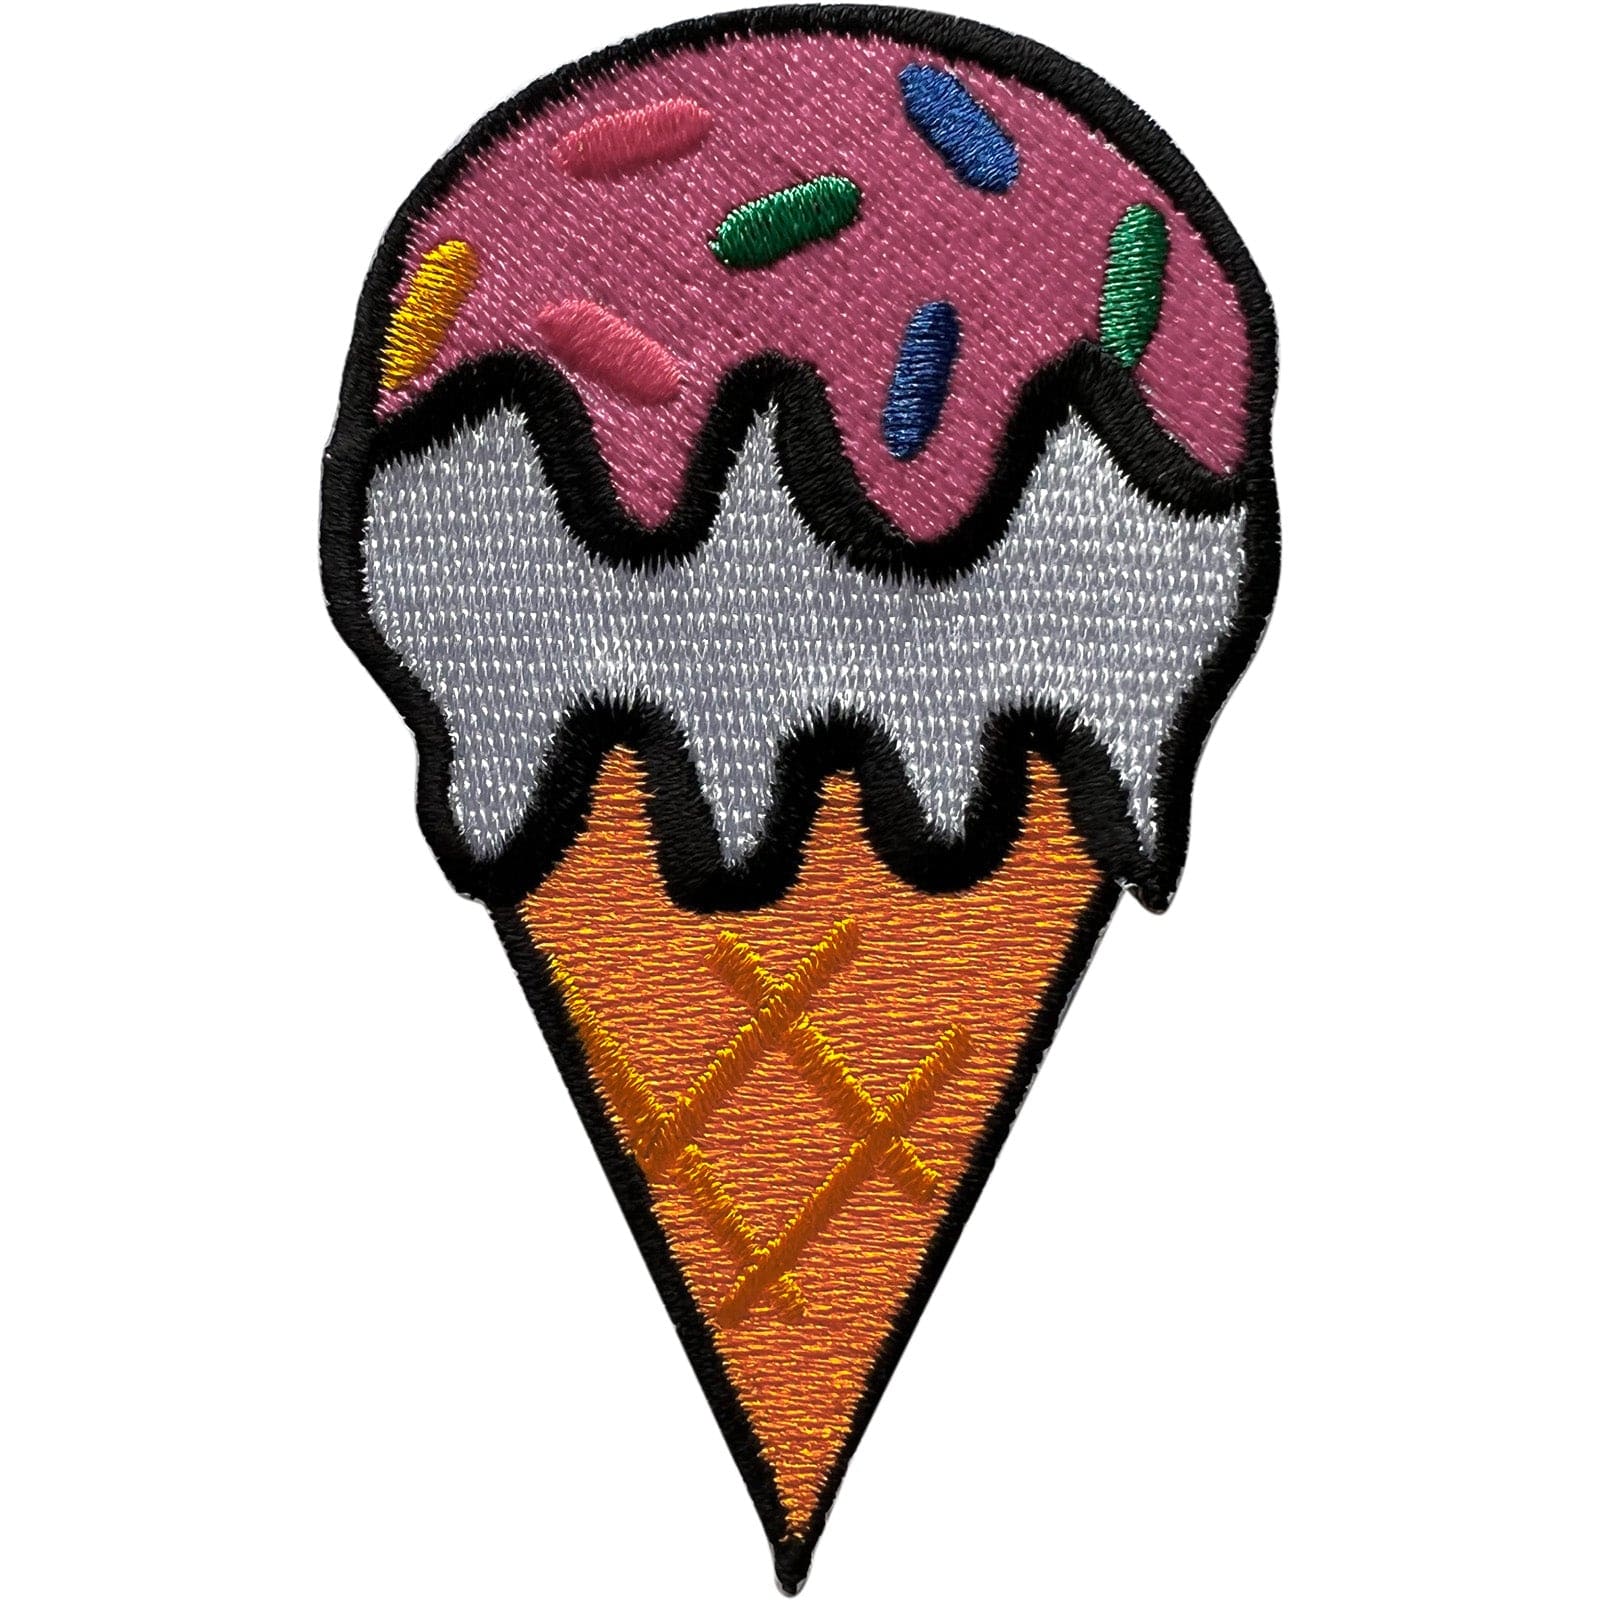 Ice Cream Cone Patch Iron On Sew On Clothes Bag Denim Fabric Embroidery Applique